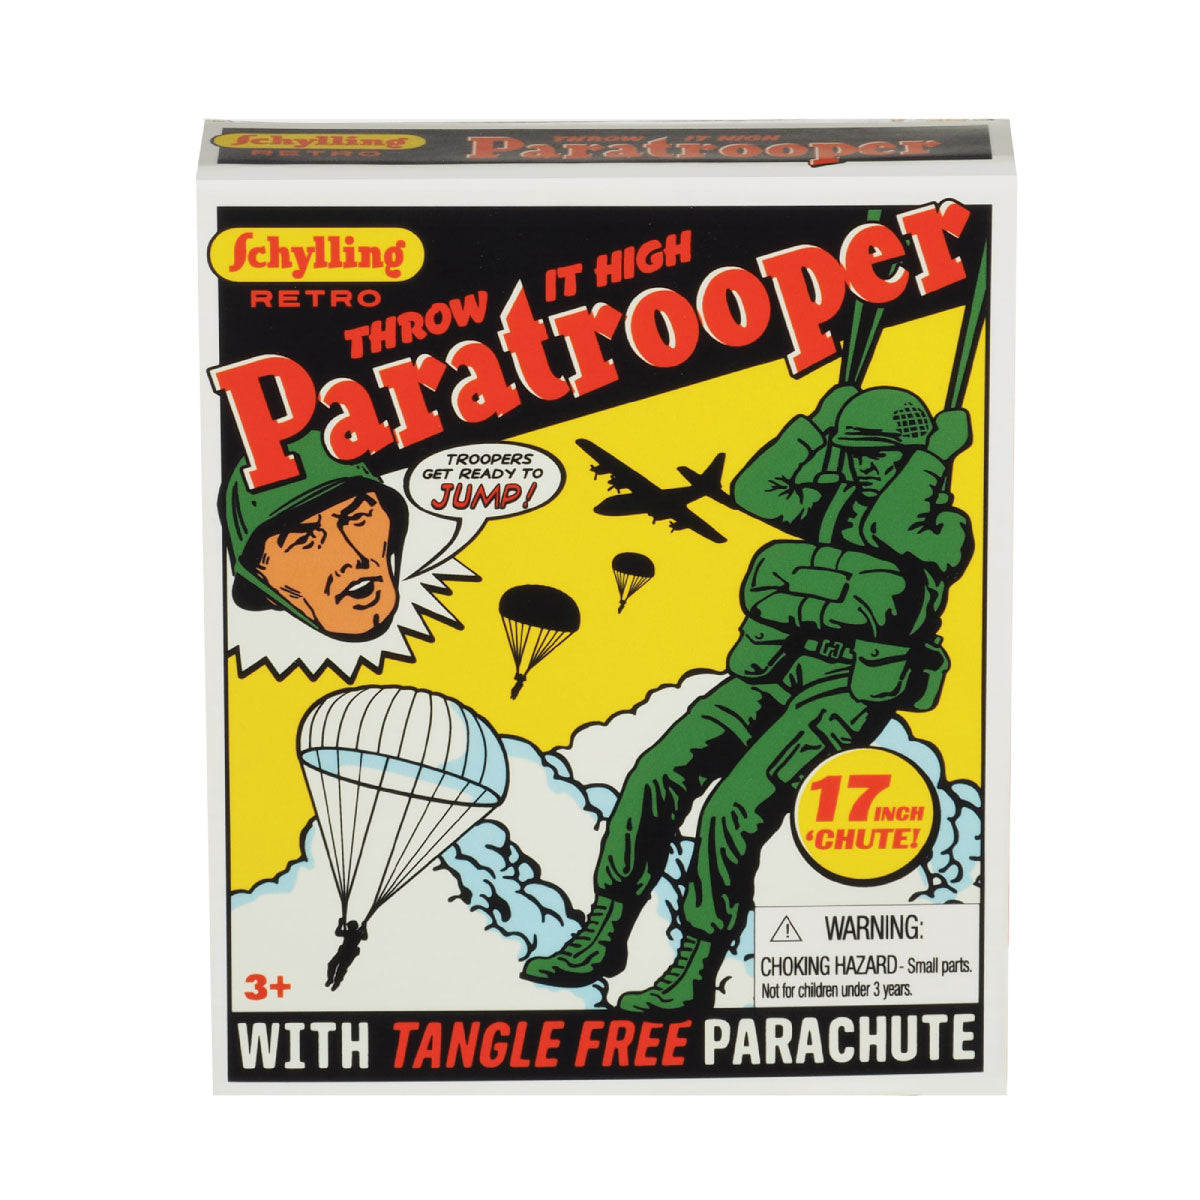 Retro Paratrooper from Schylling